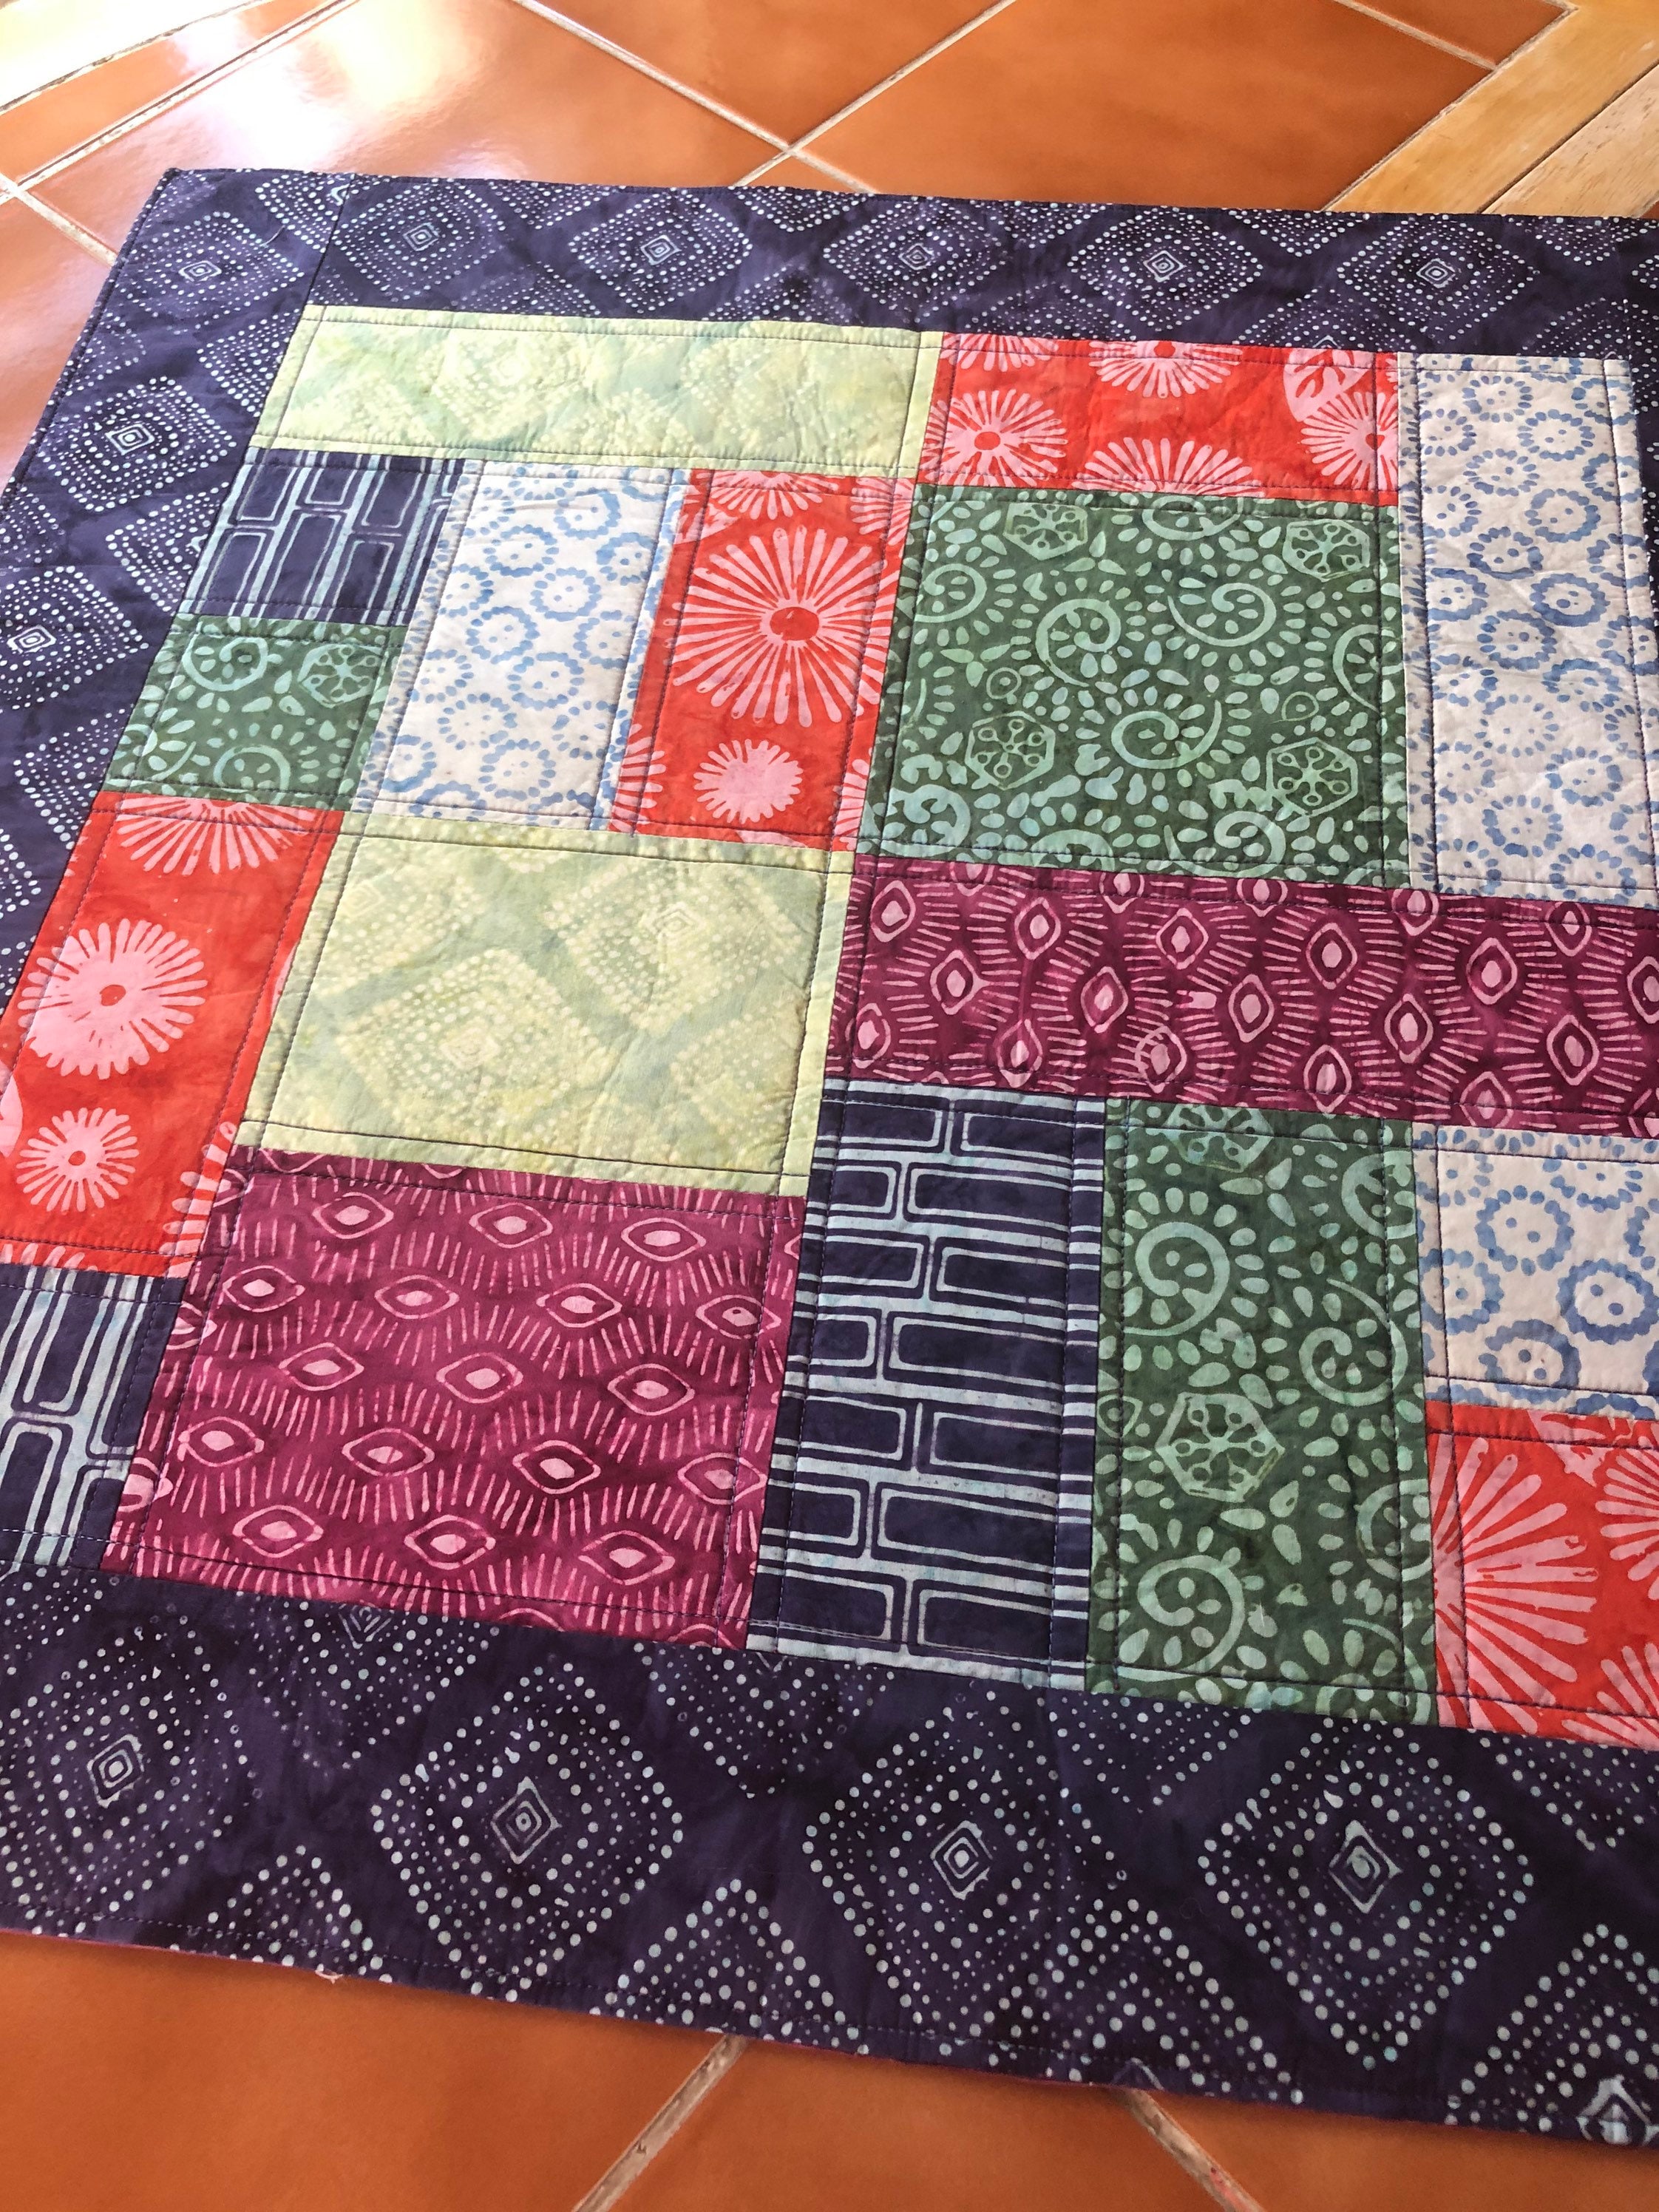 Latitude Batik by Kate Spain bright Table Runner quilted and | Etsy